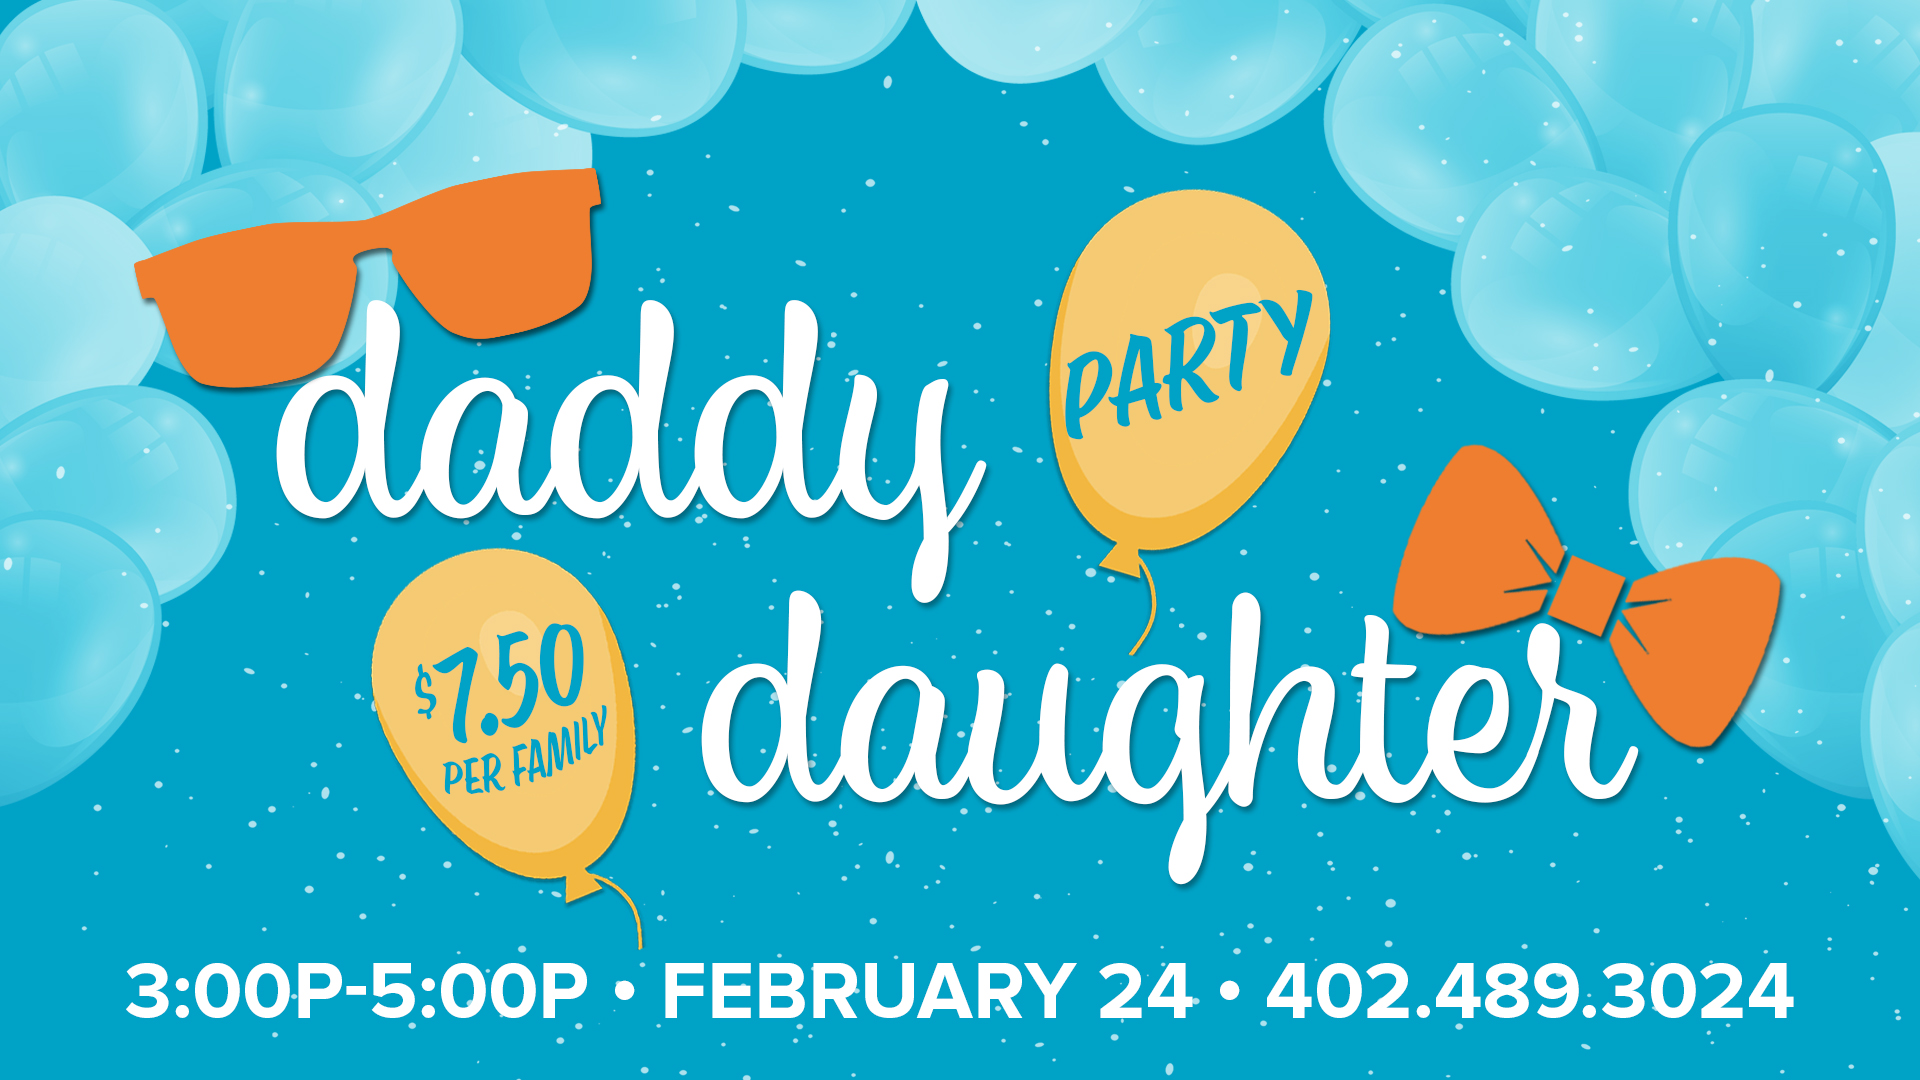 Daddy and Daughter Party